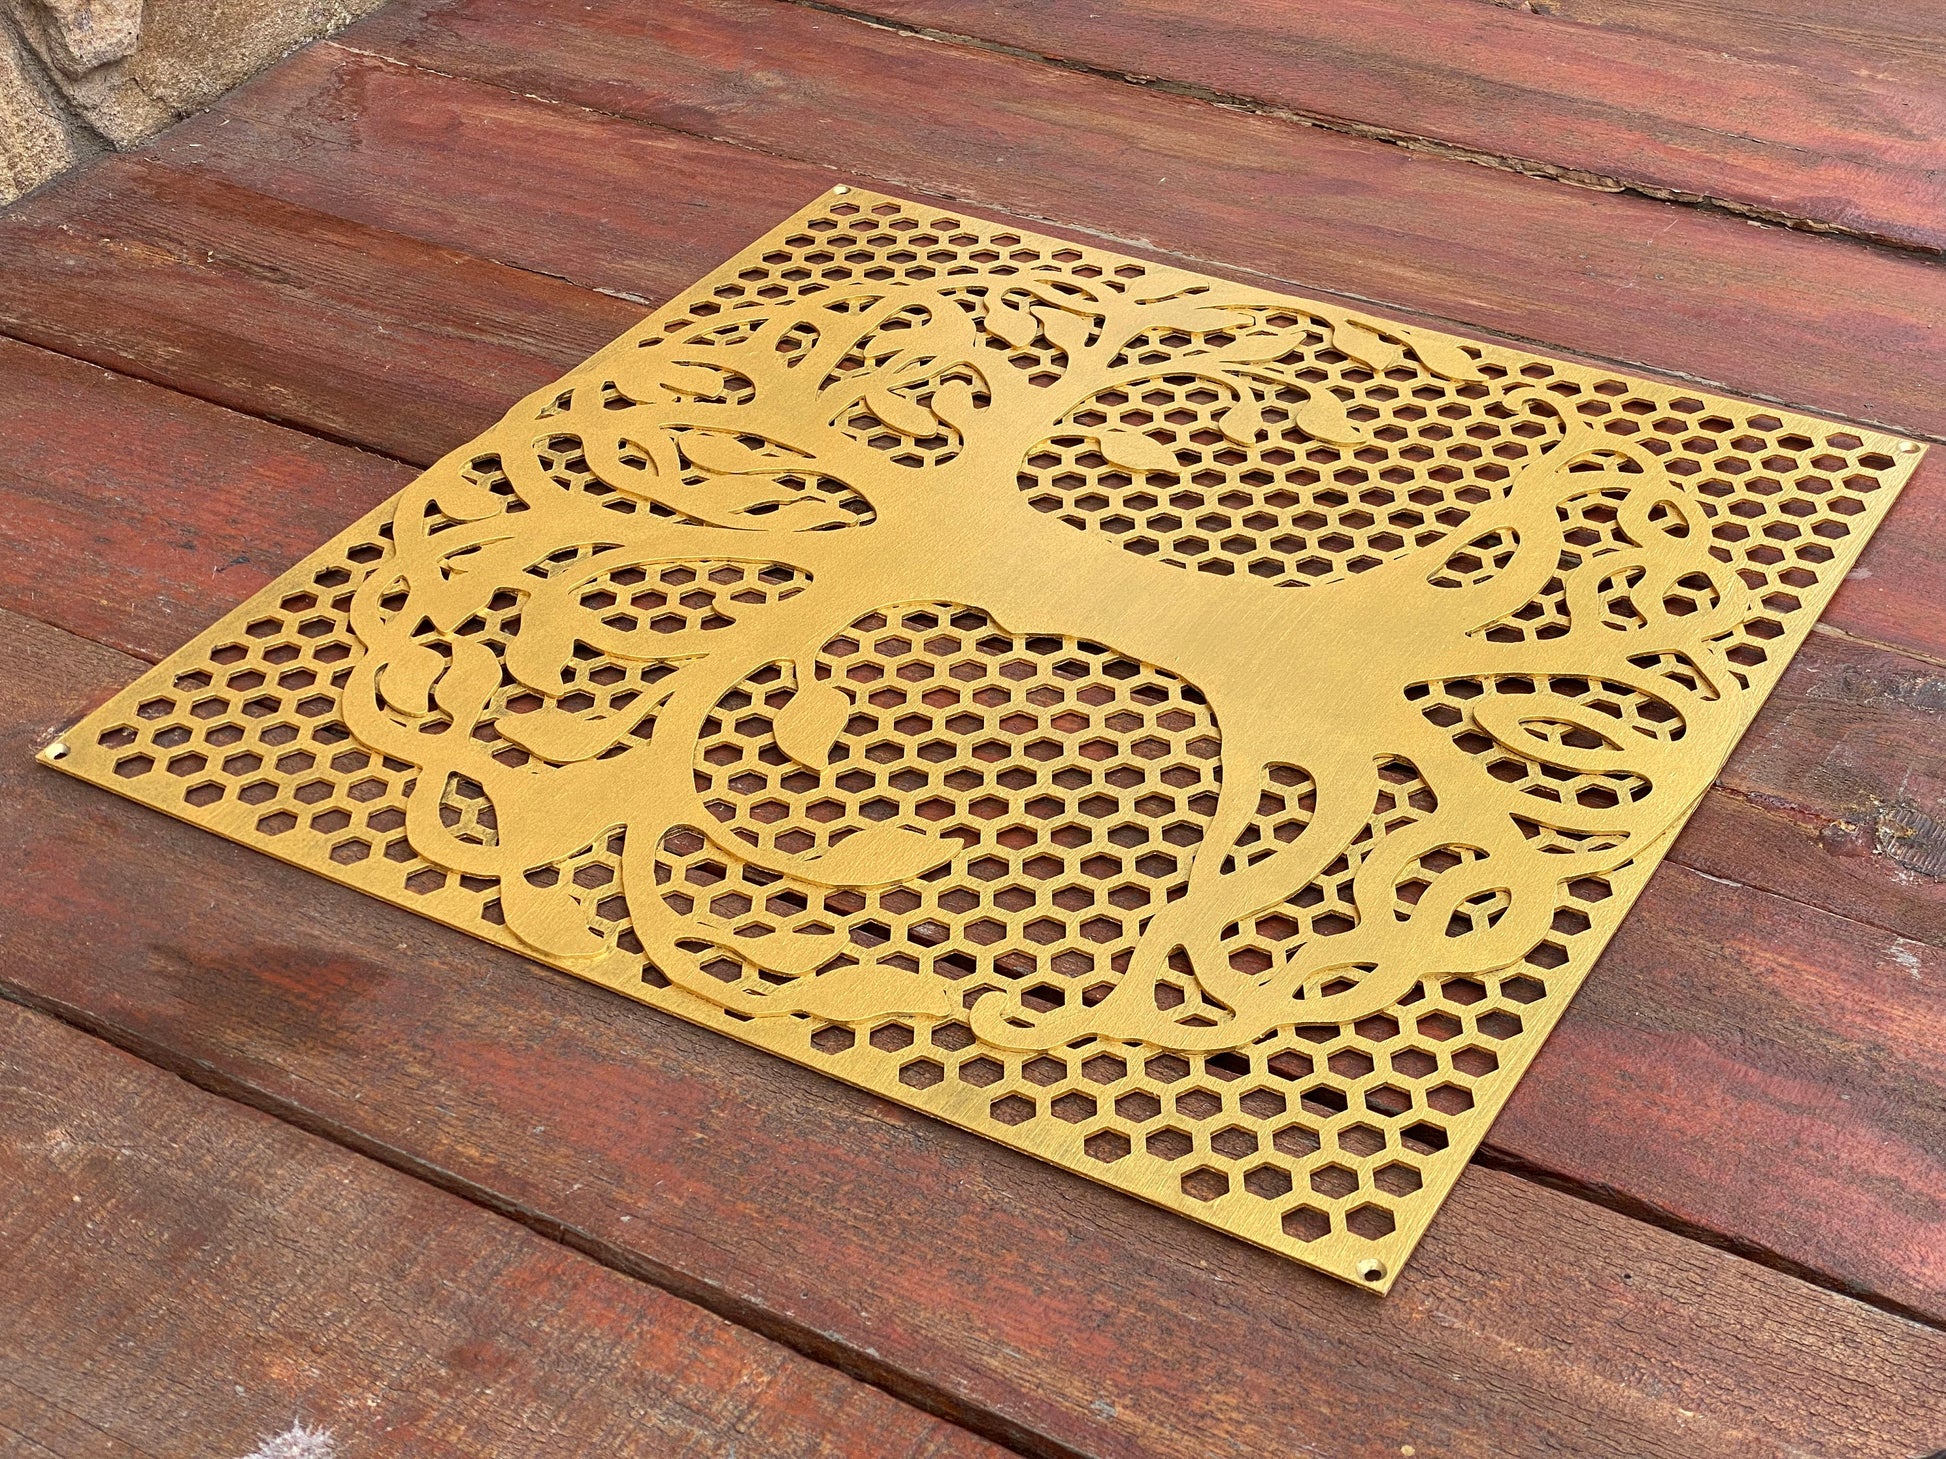 Vent cover, tree of life, grate, grid, cabinet door panel,air return grille,wall divider, anniversary,Celtic,medieval,air return grate cover